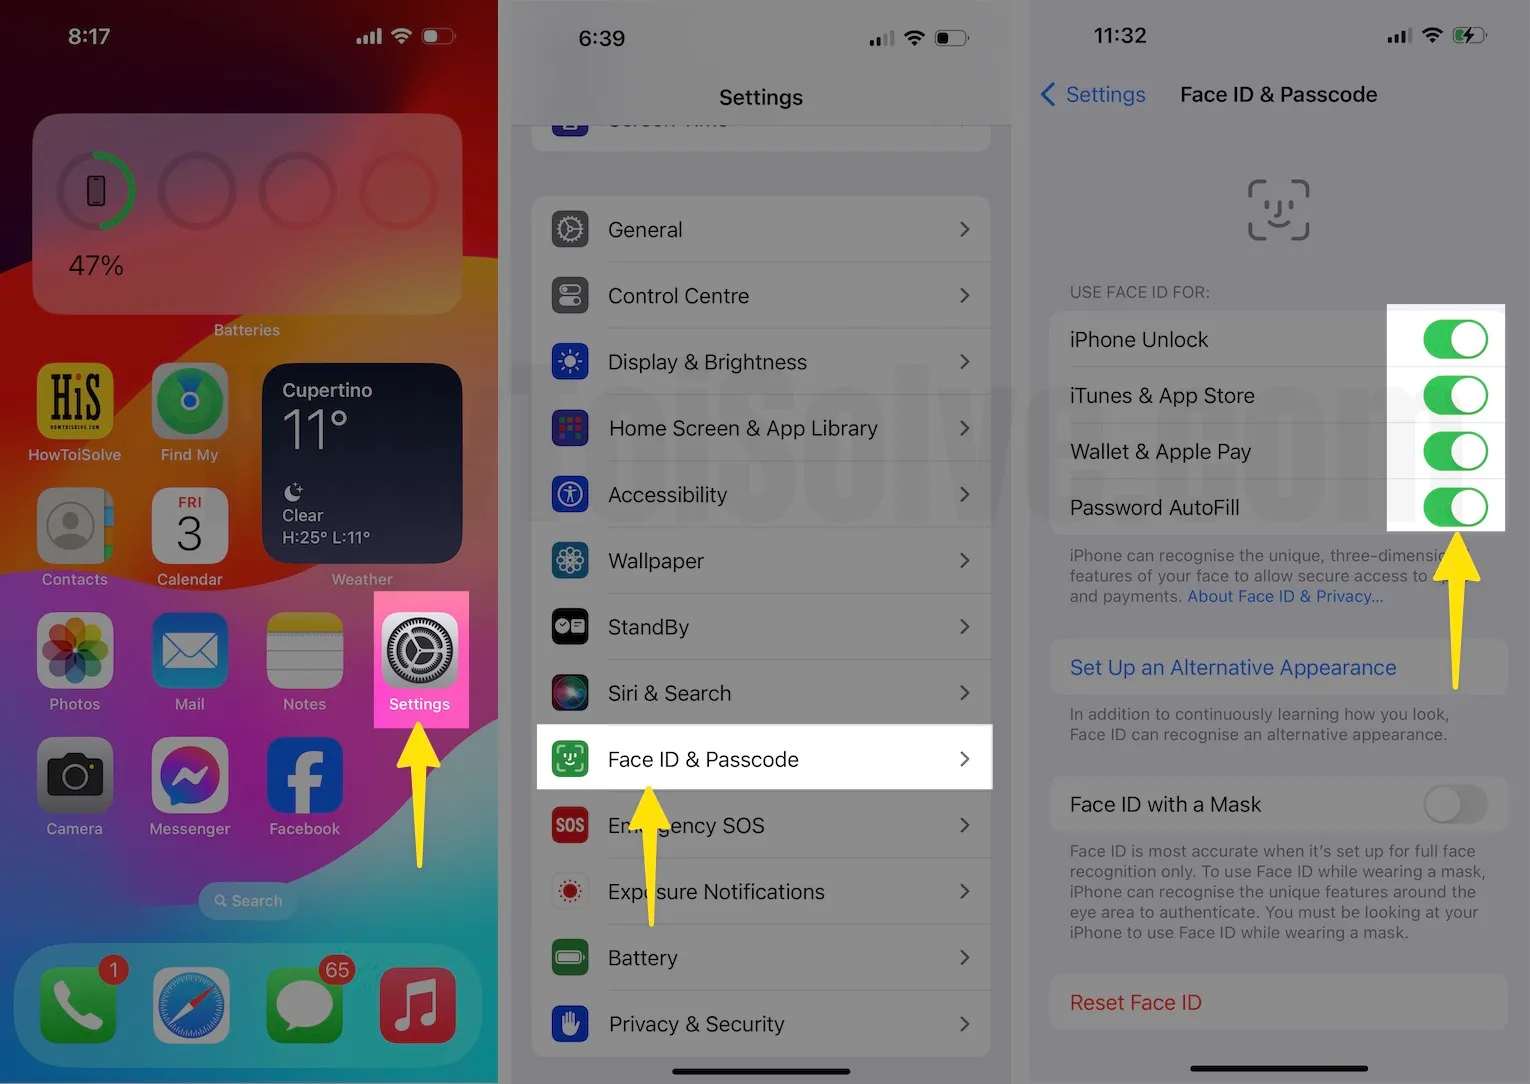 Open Setting and Select Face ID & Passcode then Enable Face ID For Services On iPhone